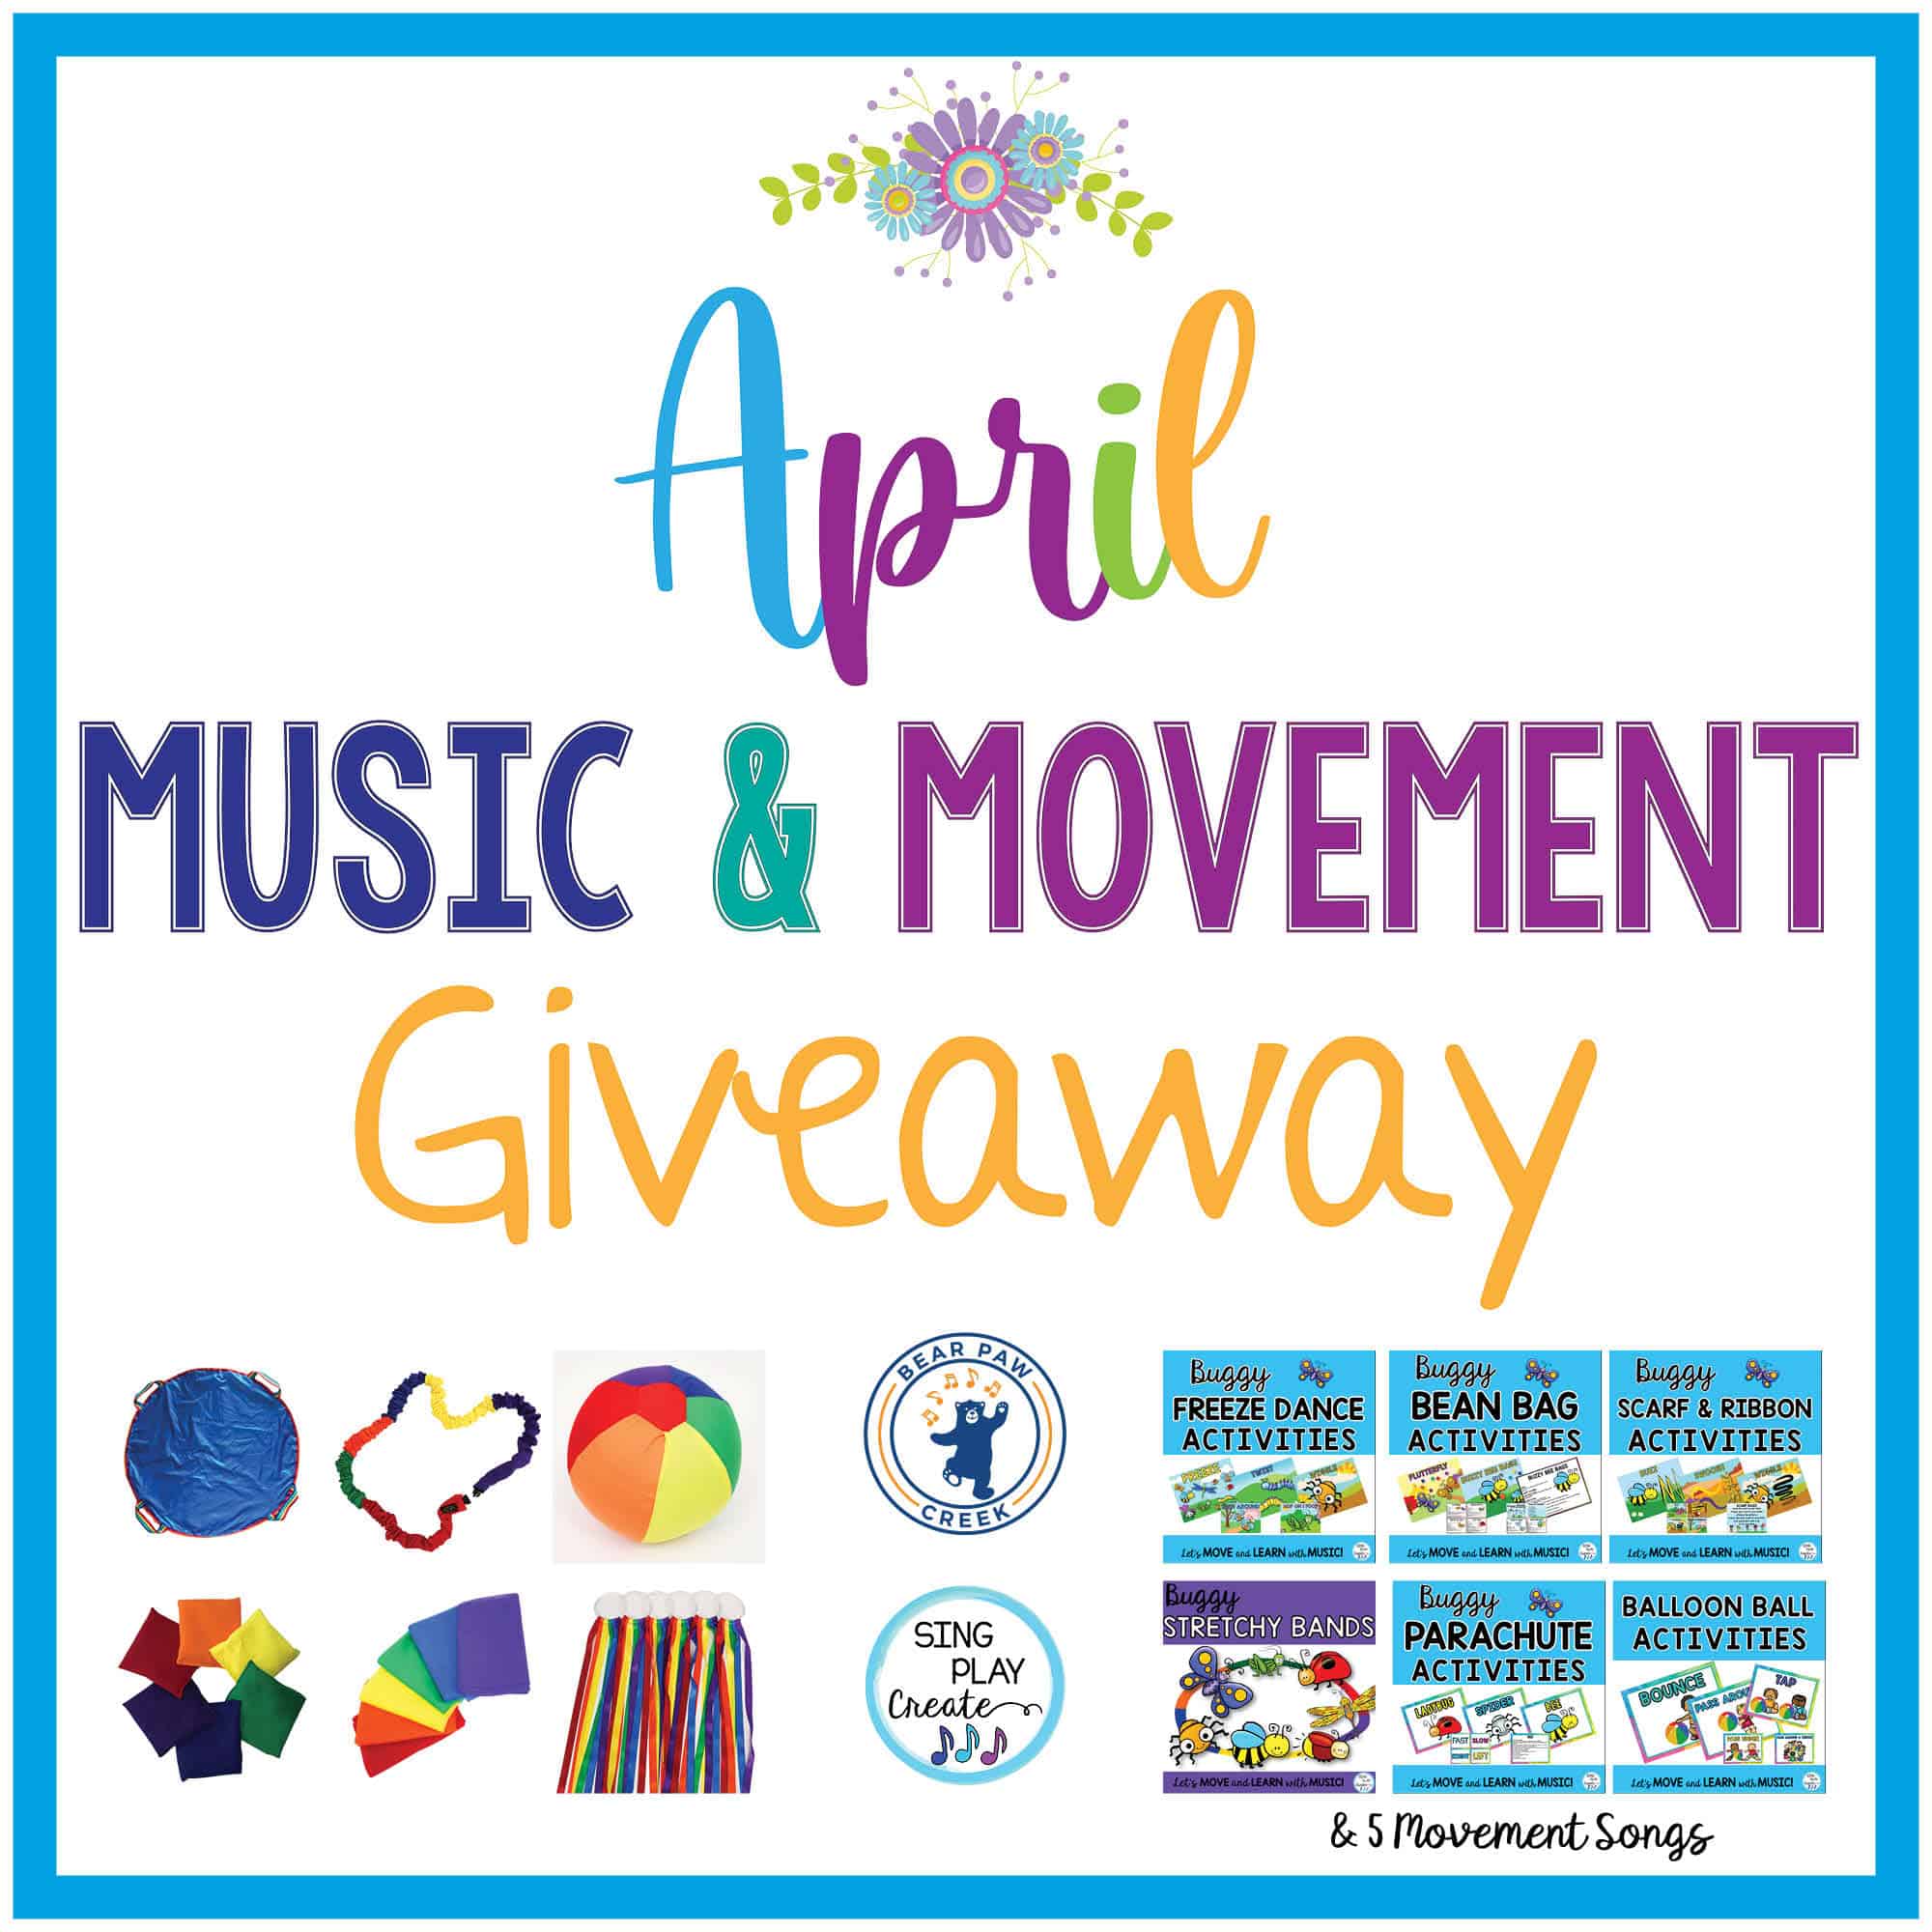 Bear Paw Creek Sing Play Create Music and Movement Giveaway Best Creative Movement Props for Teachers Parents Music Therapists Educators